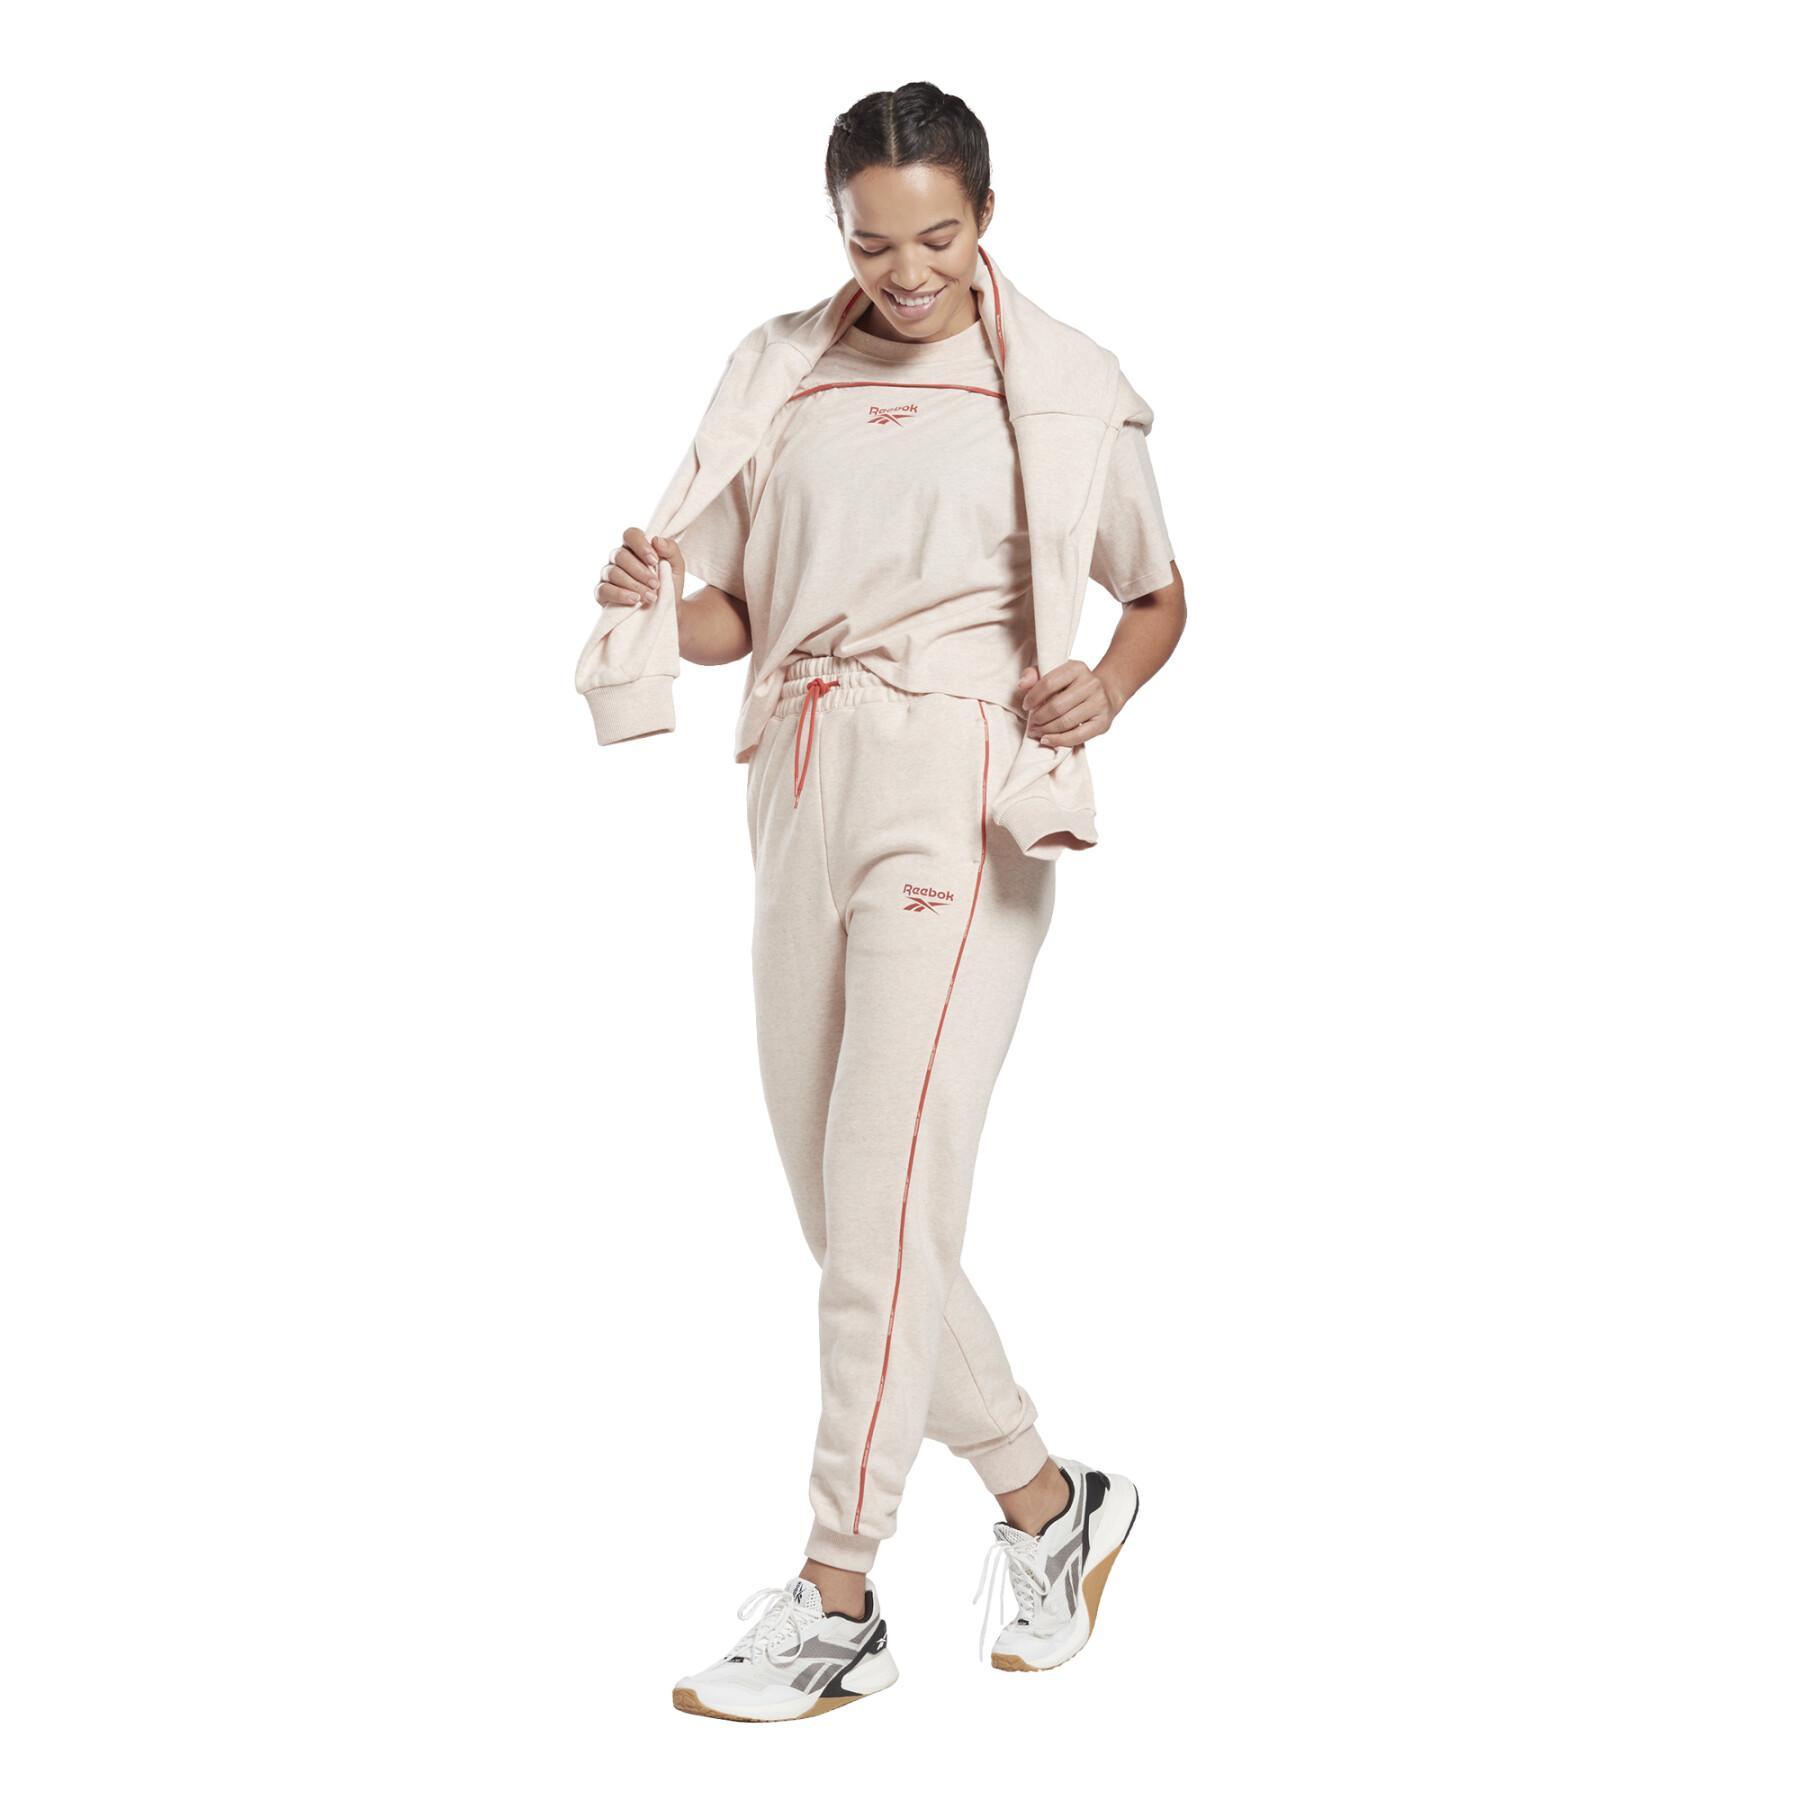 Women's trousers Reebok Piping Pack